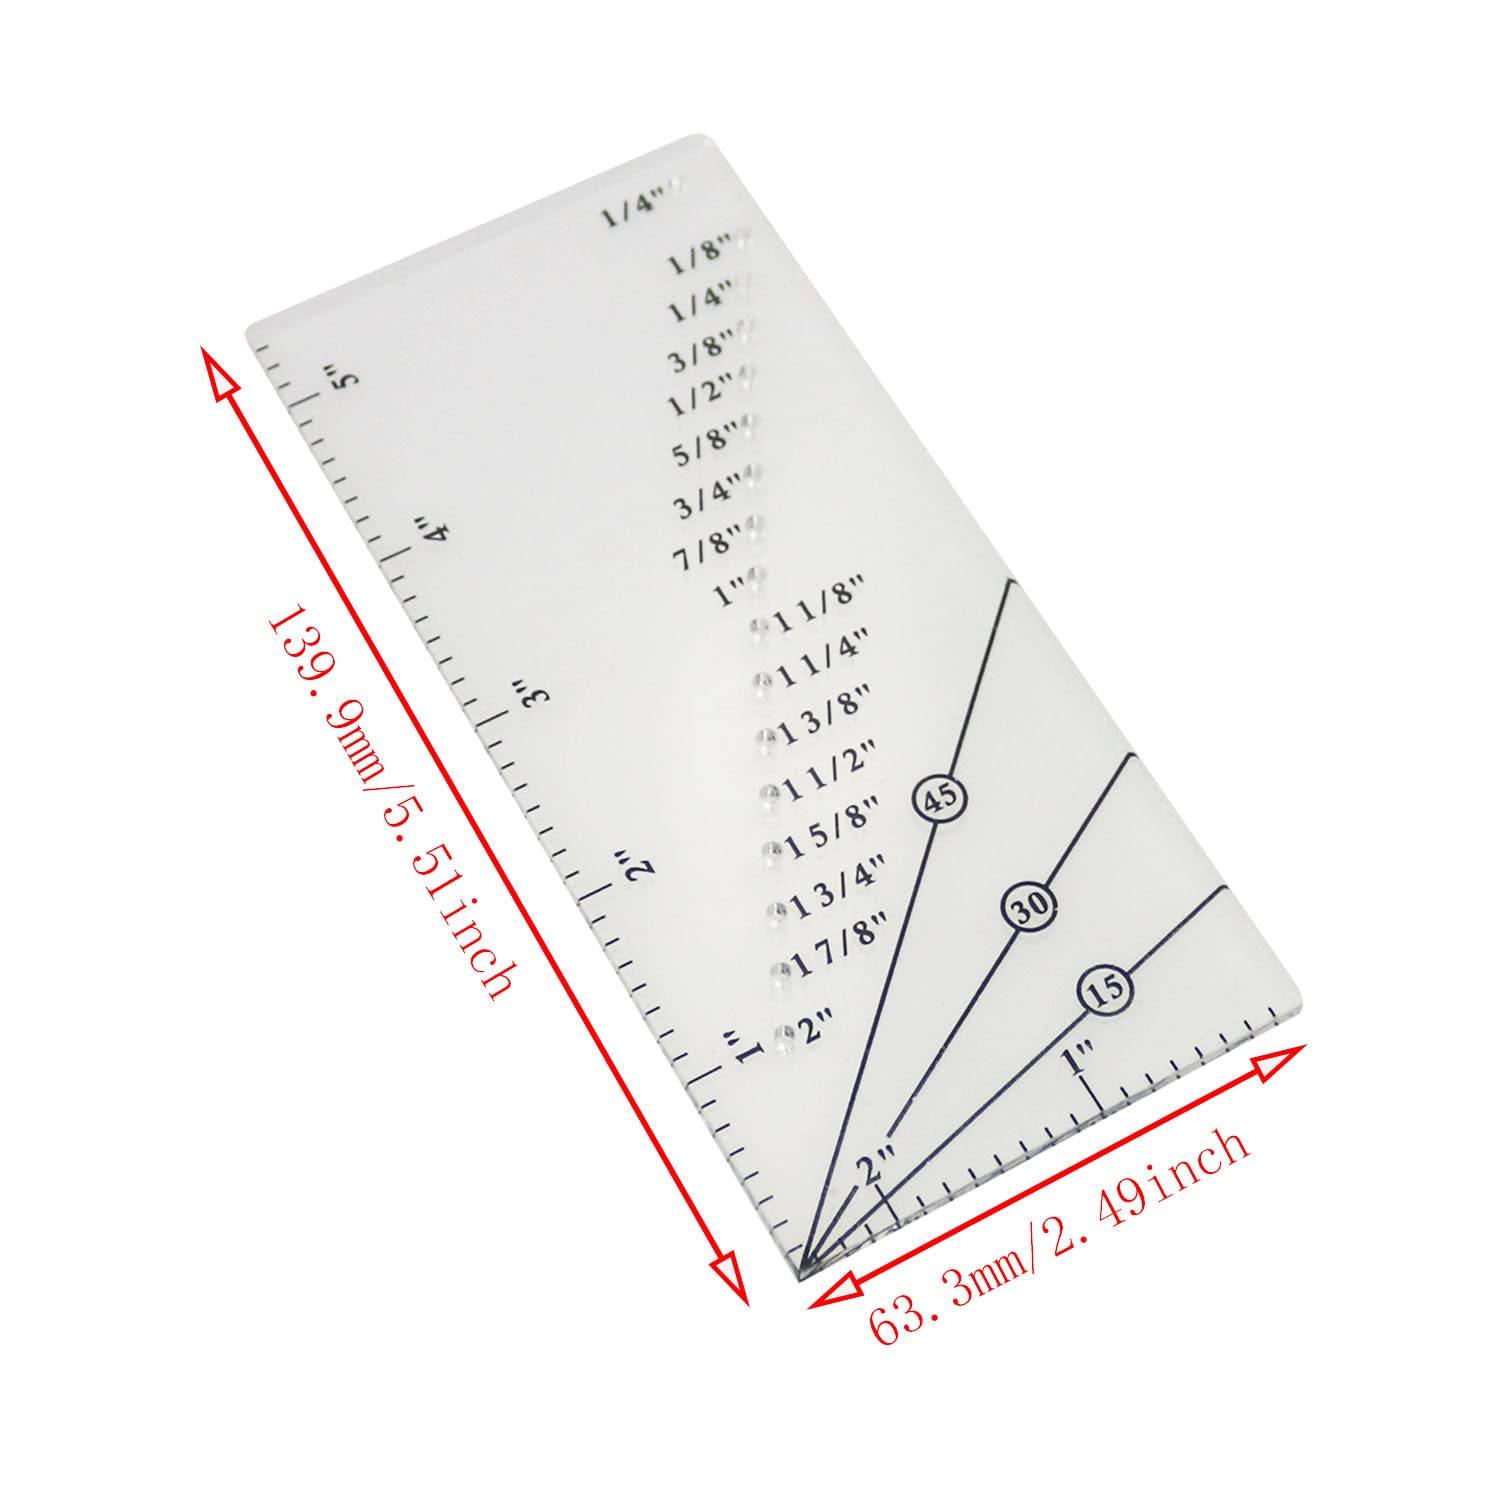 3PCS Seam Allowance Ruler Quilting Seam Guide Ruler for 1/8 to